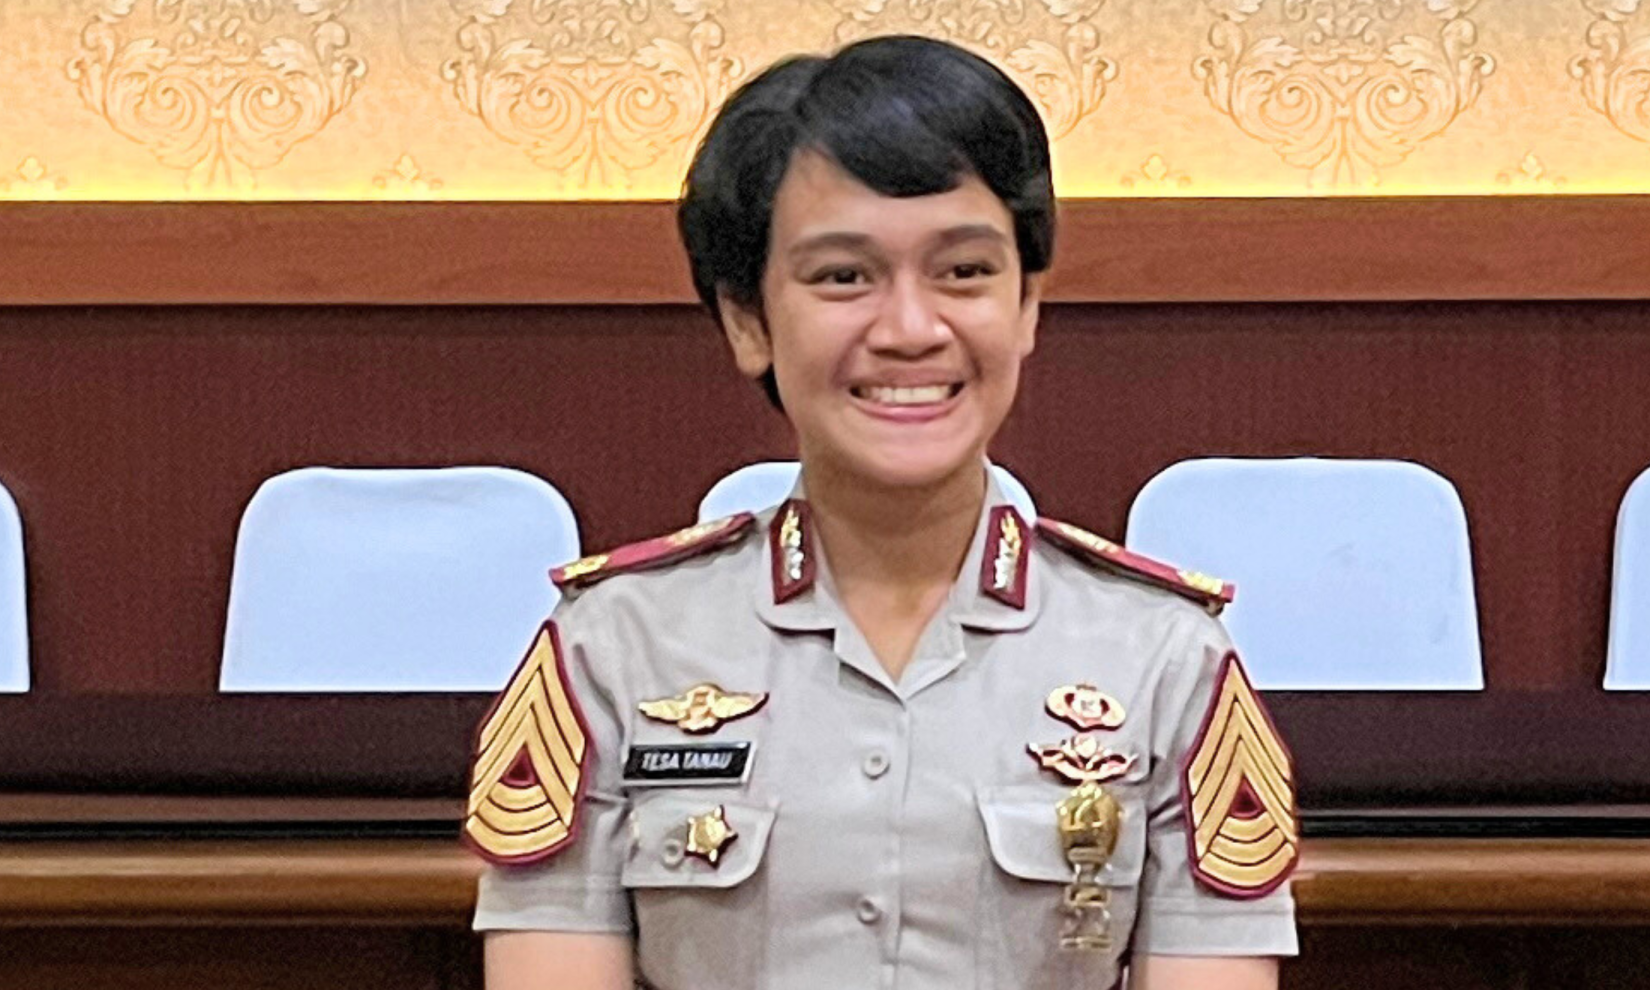 Tesalonika, Level 4 Cadet at the Indonesian Police Academy, winner of the top 10 finalists in the UNODC Essay Competition on Police Integrity.